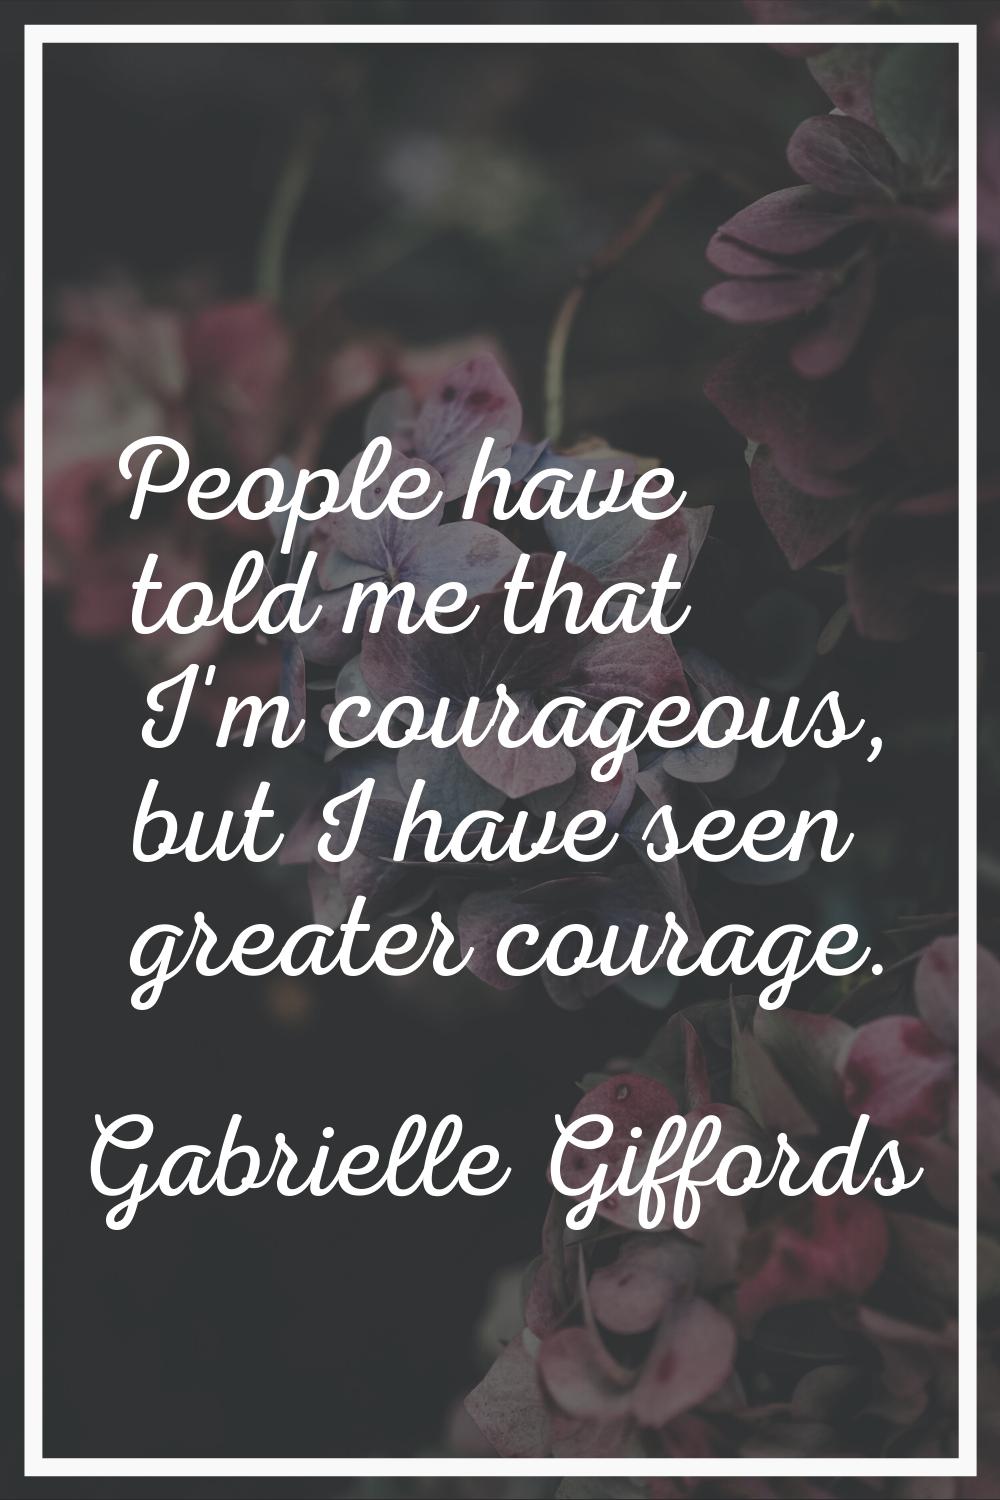 People have told me that I'm courageous, but I have seen greater courage.